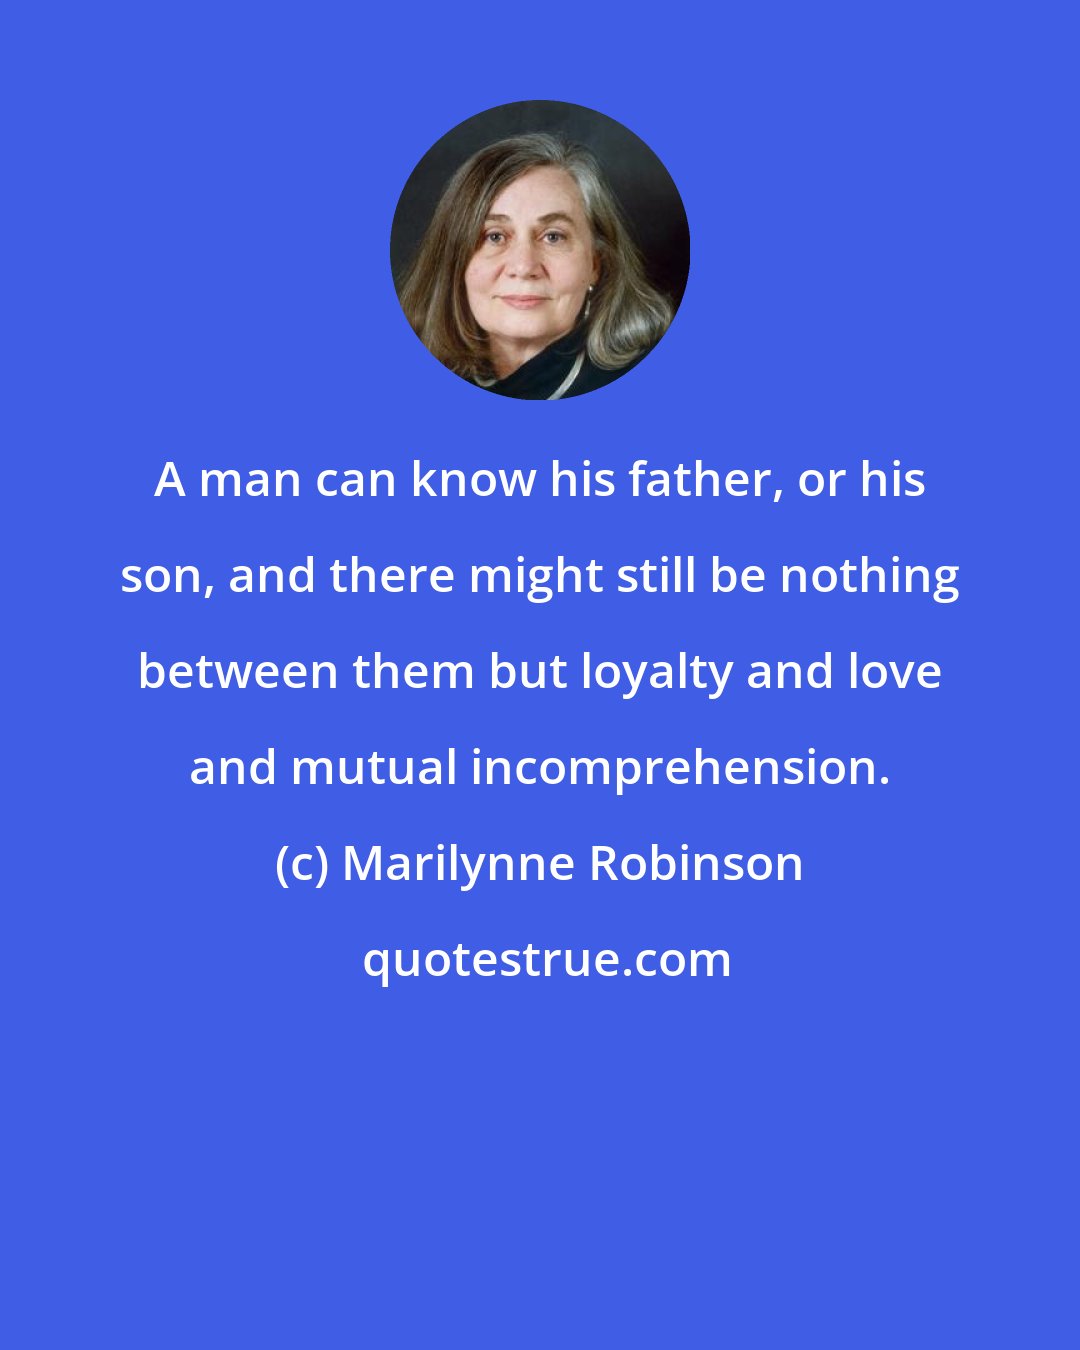 Marilynne Robinson: A man can know his father, or his son, and there might still be nothing between them but loyalty and love and mutual incomprehension.